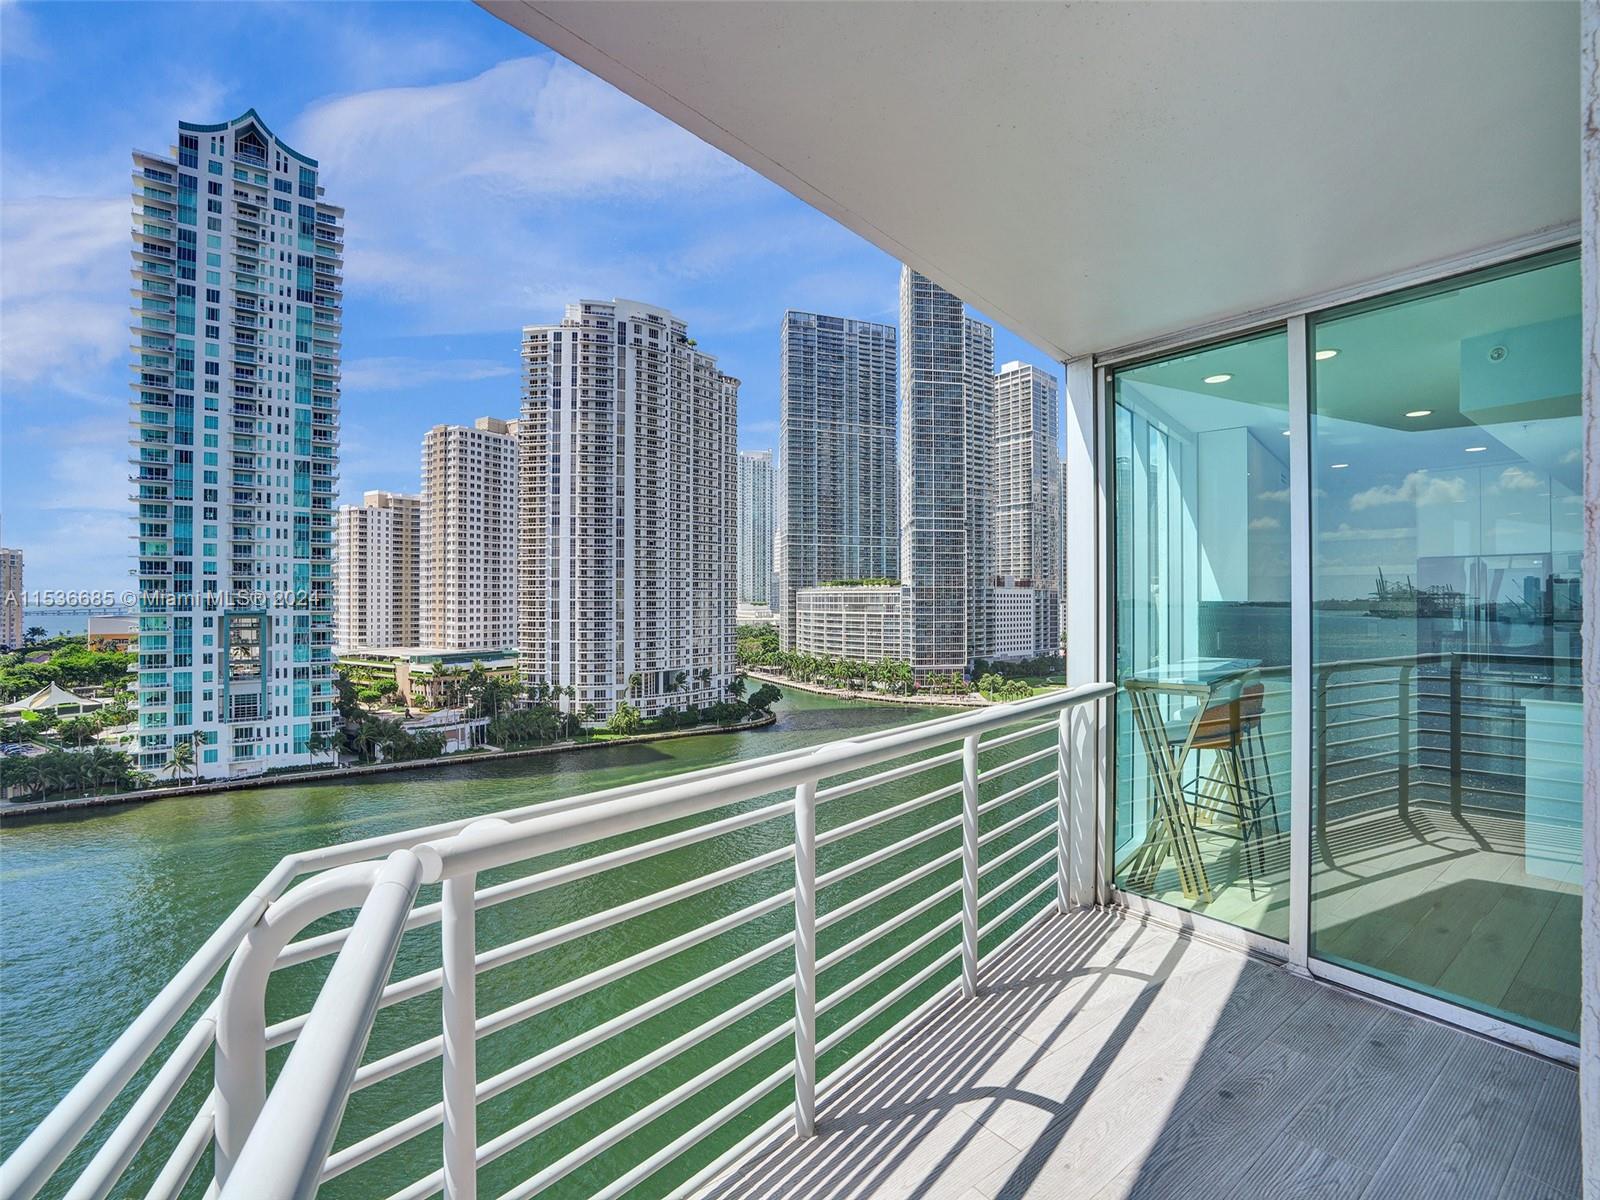 Enjoy luxury living in this elegantly renovated 3 bed, 2 bath condo with a large wraparound balcony overlooking the Ocean and Biscayne Bay! Relish in views of manatees, dolphins, and the beautiful Brickell skyline. Amenities include 2 gyms, business center, convenience store & prestigious Il Gabbiano and Mastro's Ocean Club Restaurants located in building. Home comes with a unique cozy electric fireplace, induction cooktop, quartz countertops, new appliances, range hood, soundproofed ceilings/walls, & new hardwood floors. Steps away from Hell's Kitchen, Whole Foods, Kaseya center, Bayside park, Brickell City Centre, Metromover, & Silverspot Movie Theater. High Speed Internet, cable, & water included. 1 assigned garage parking. Sold furnished. Tenant occupied until October 2024.